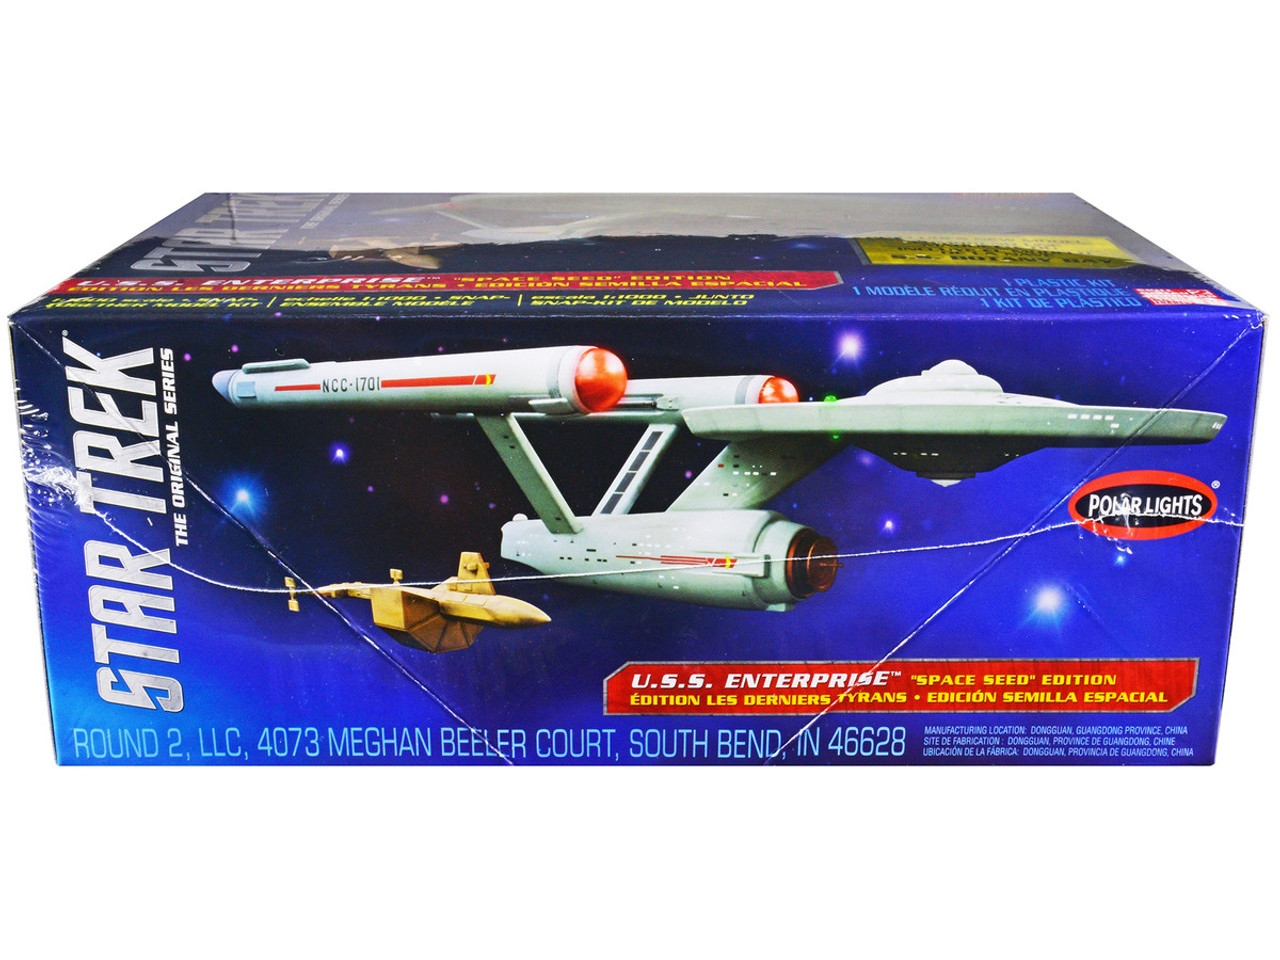 Skill 2 Model Kit Star Trek U.S.S. Enterprise and S.S. Botany Bay "The Original Series" "Space Seed" Edition Snap-Together 1/1000 Scale Model by Polar Lights